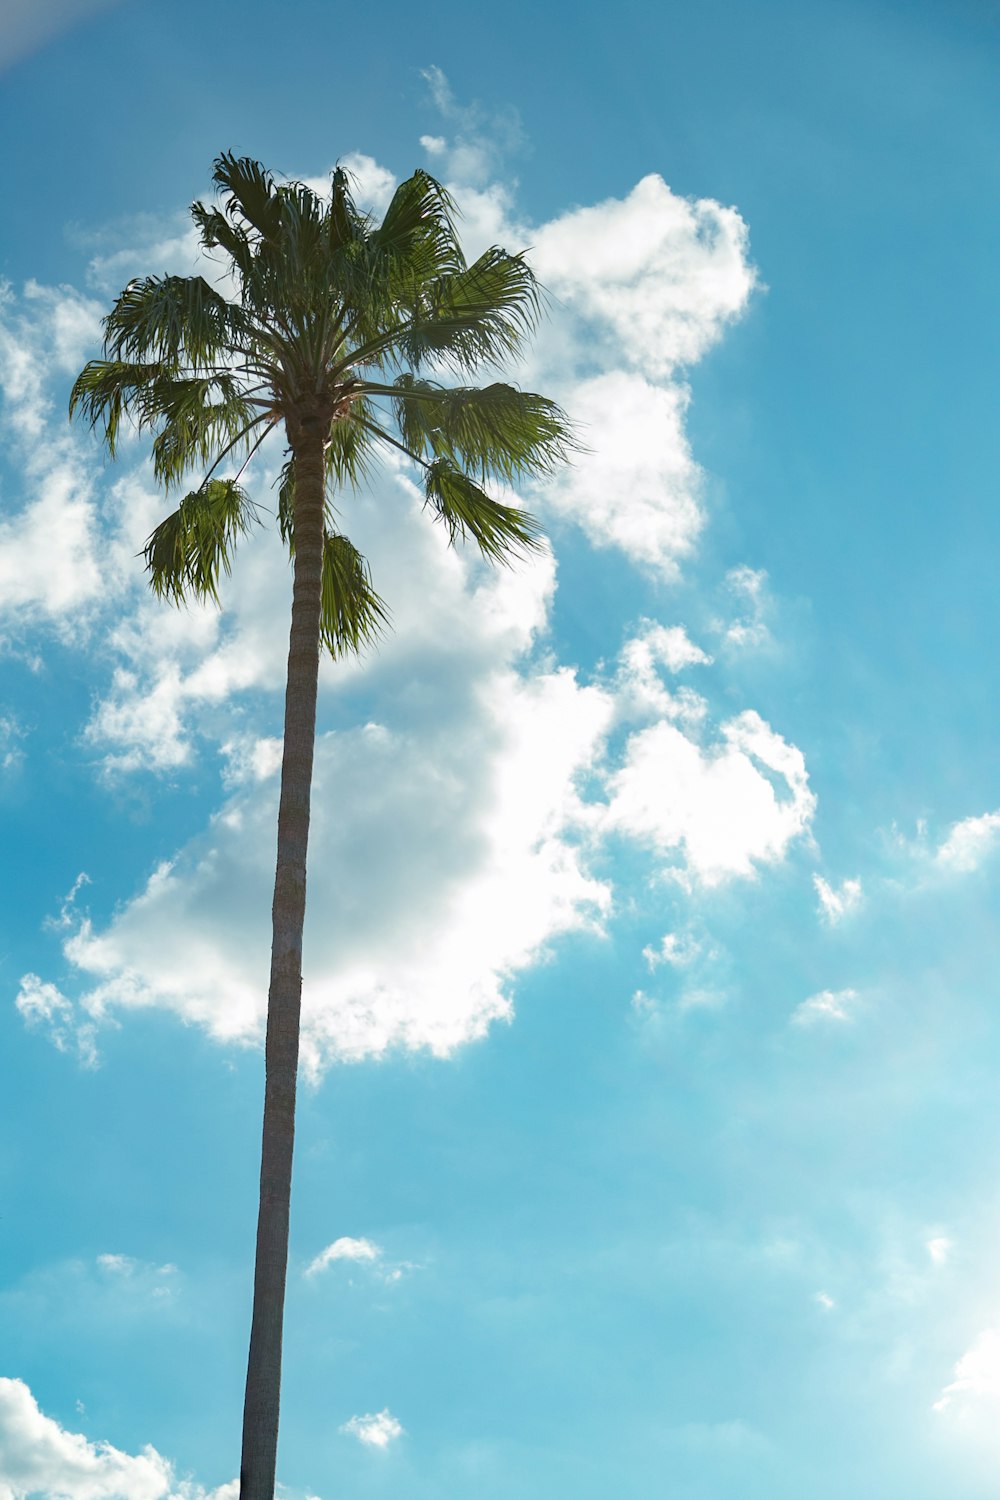 a tall palm tree sitting under a blue cloudy sky